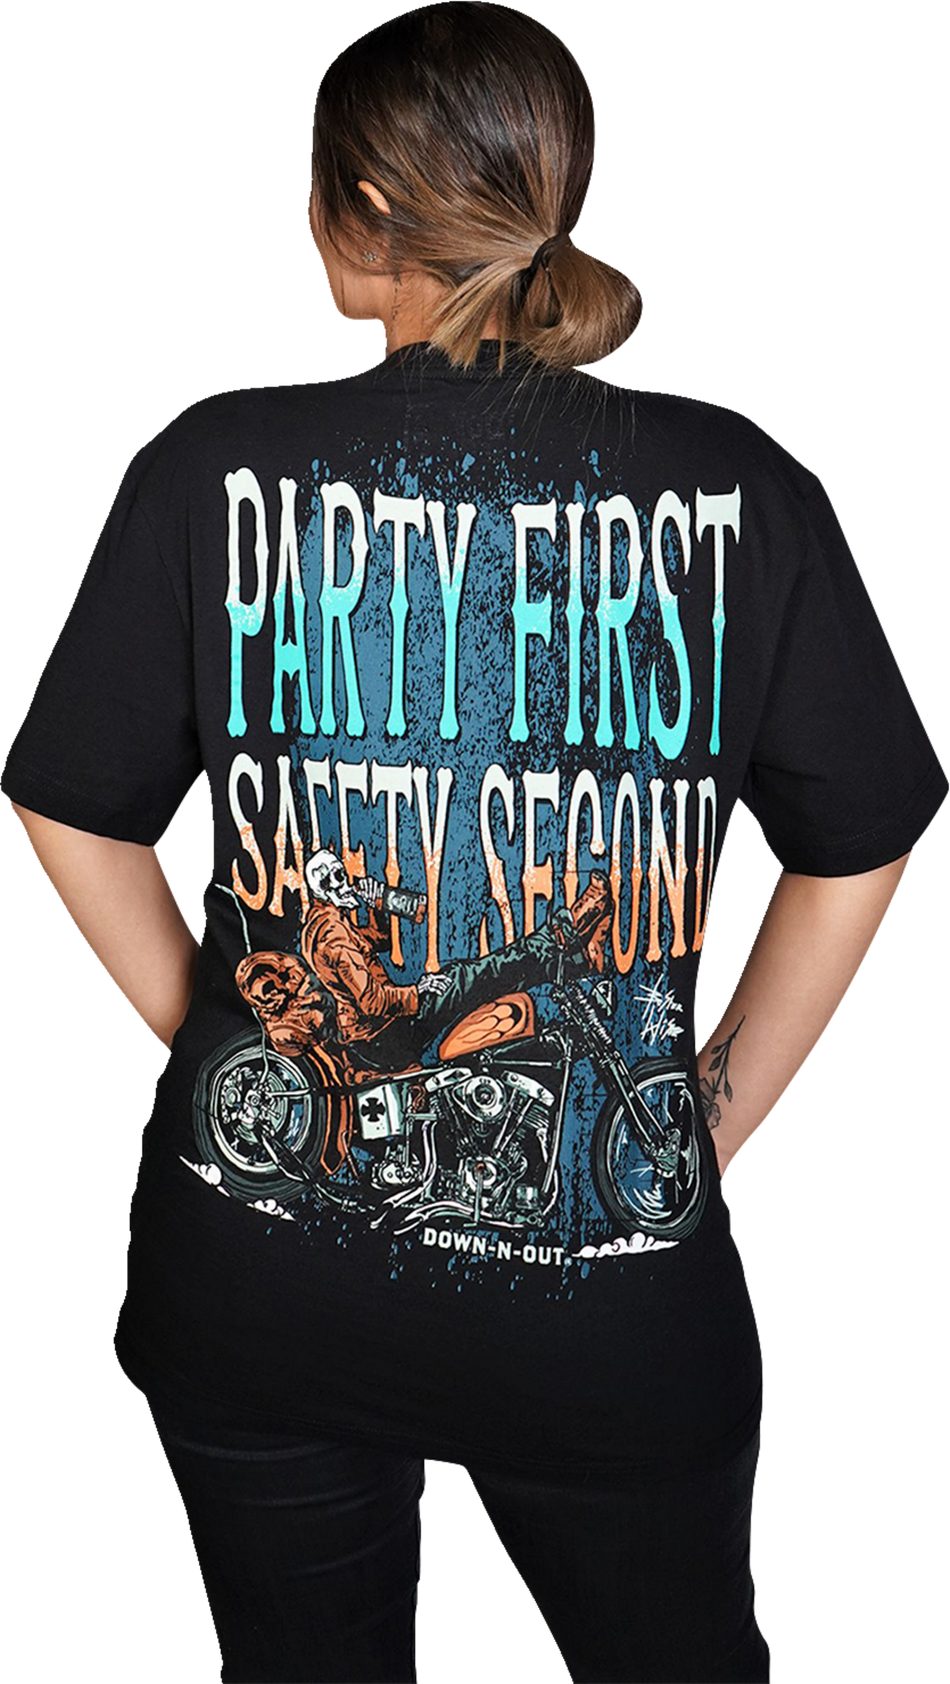 LETHAL THREAT Down-N-Out Party First Safety Second - Black - XL DT10043XL